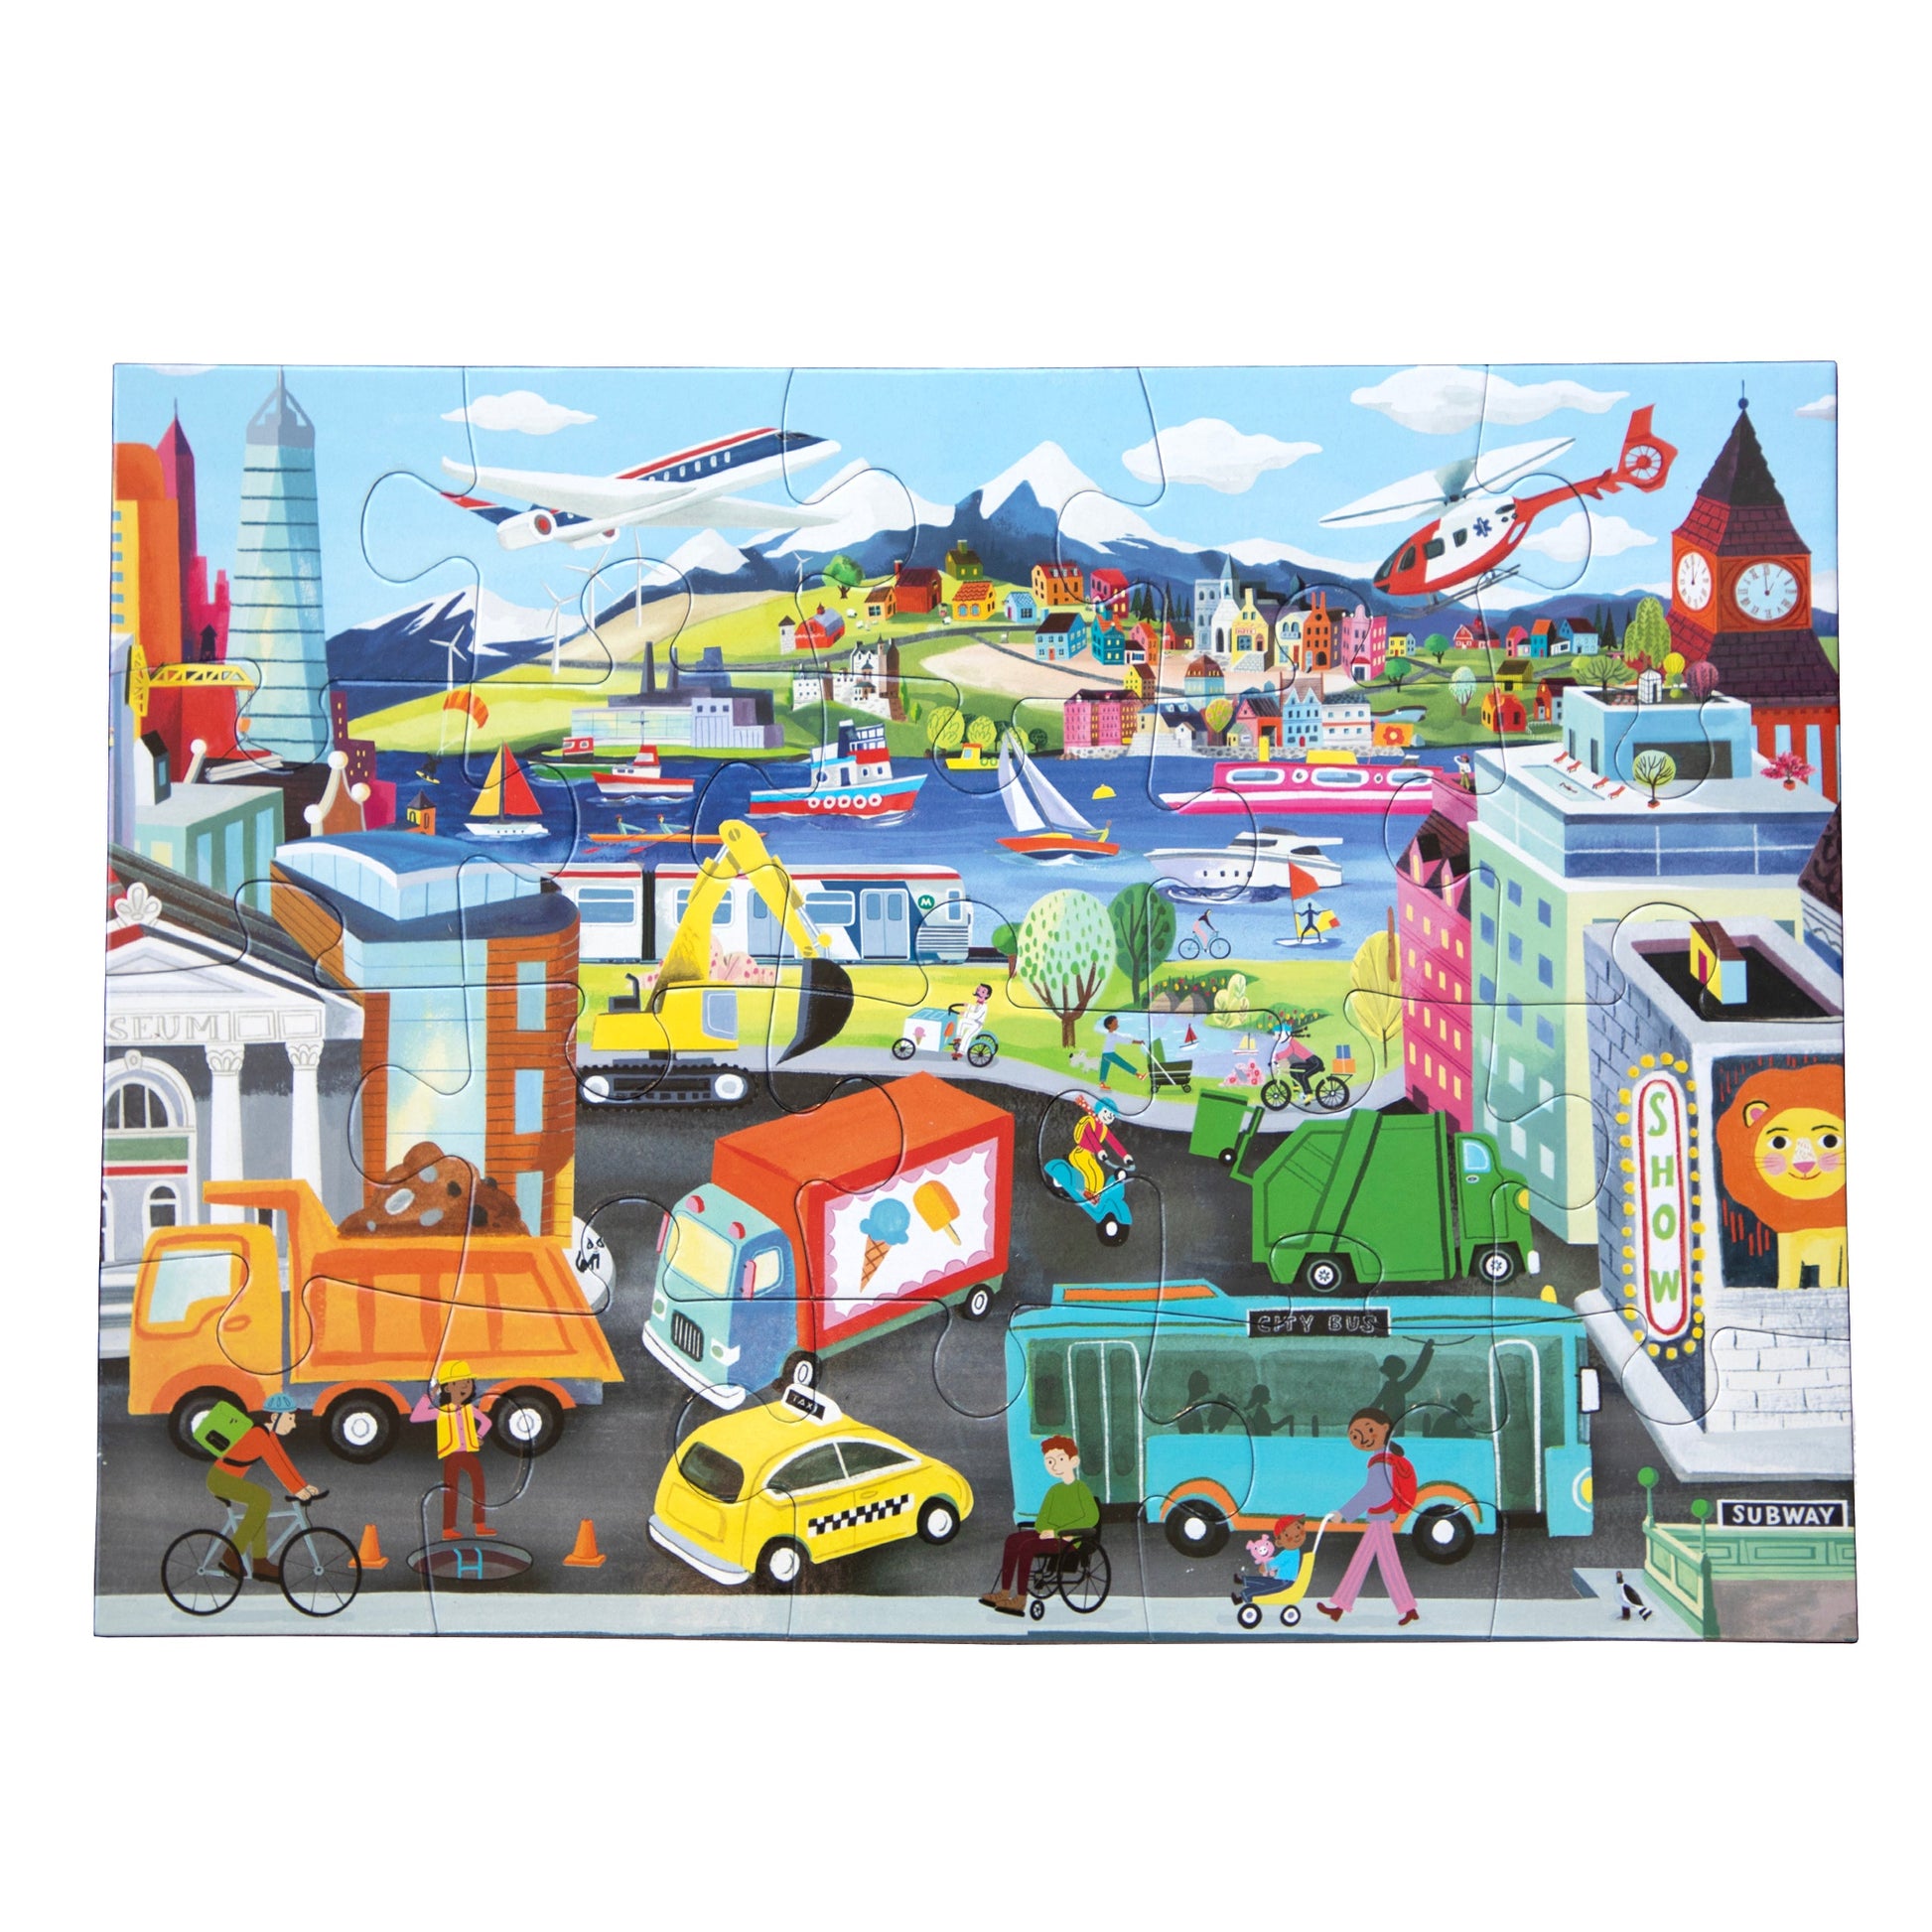 Construction Vehicles - The Kids' Picture Show Jigsaw Puzzle for